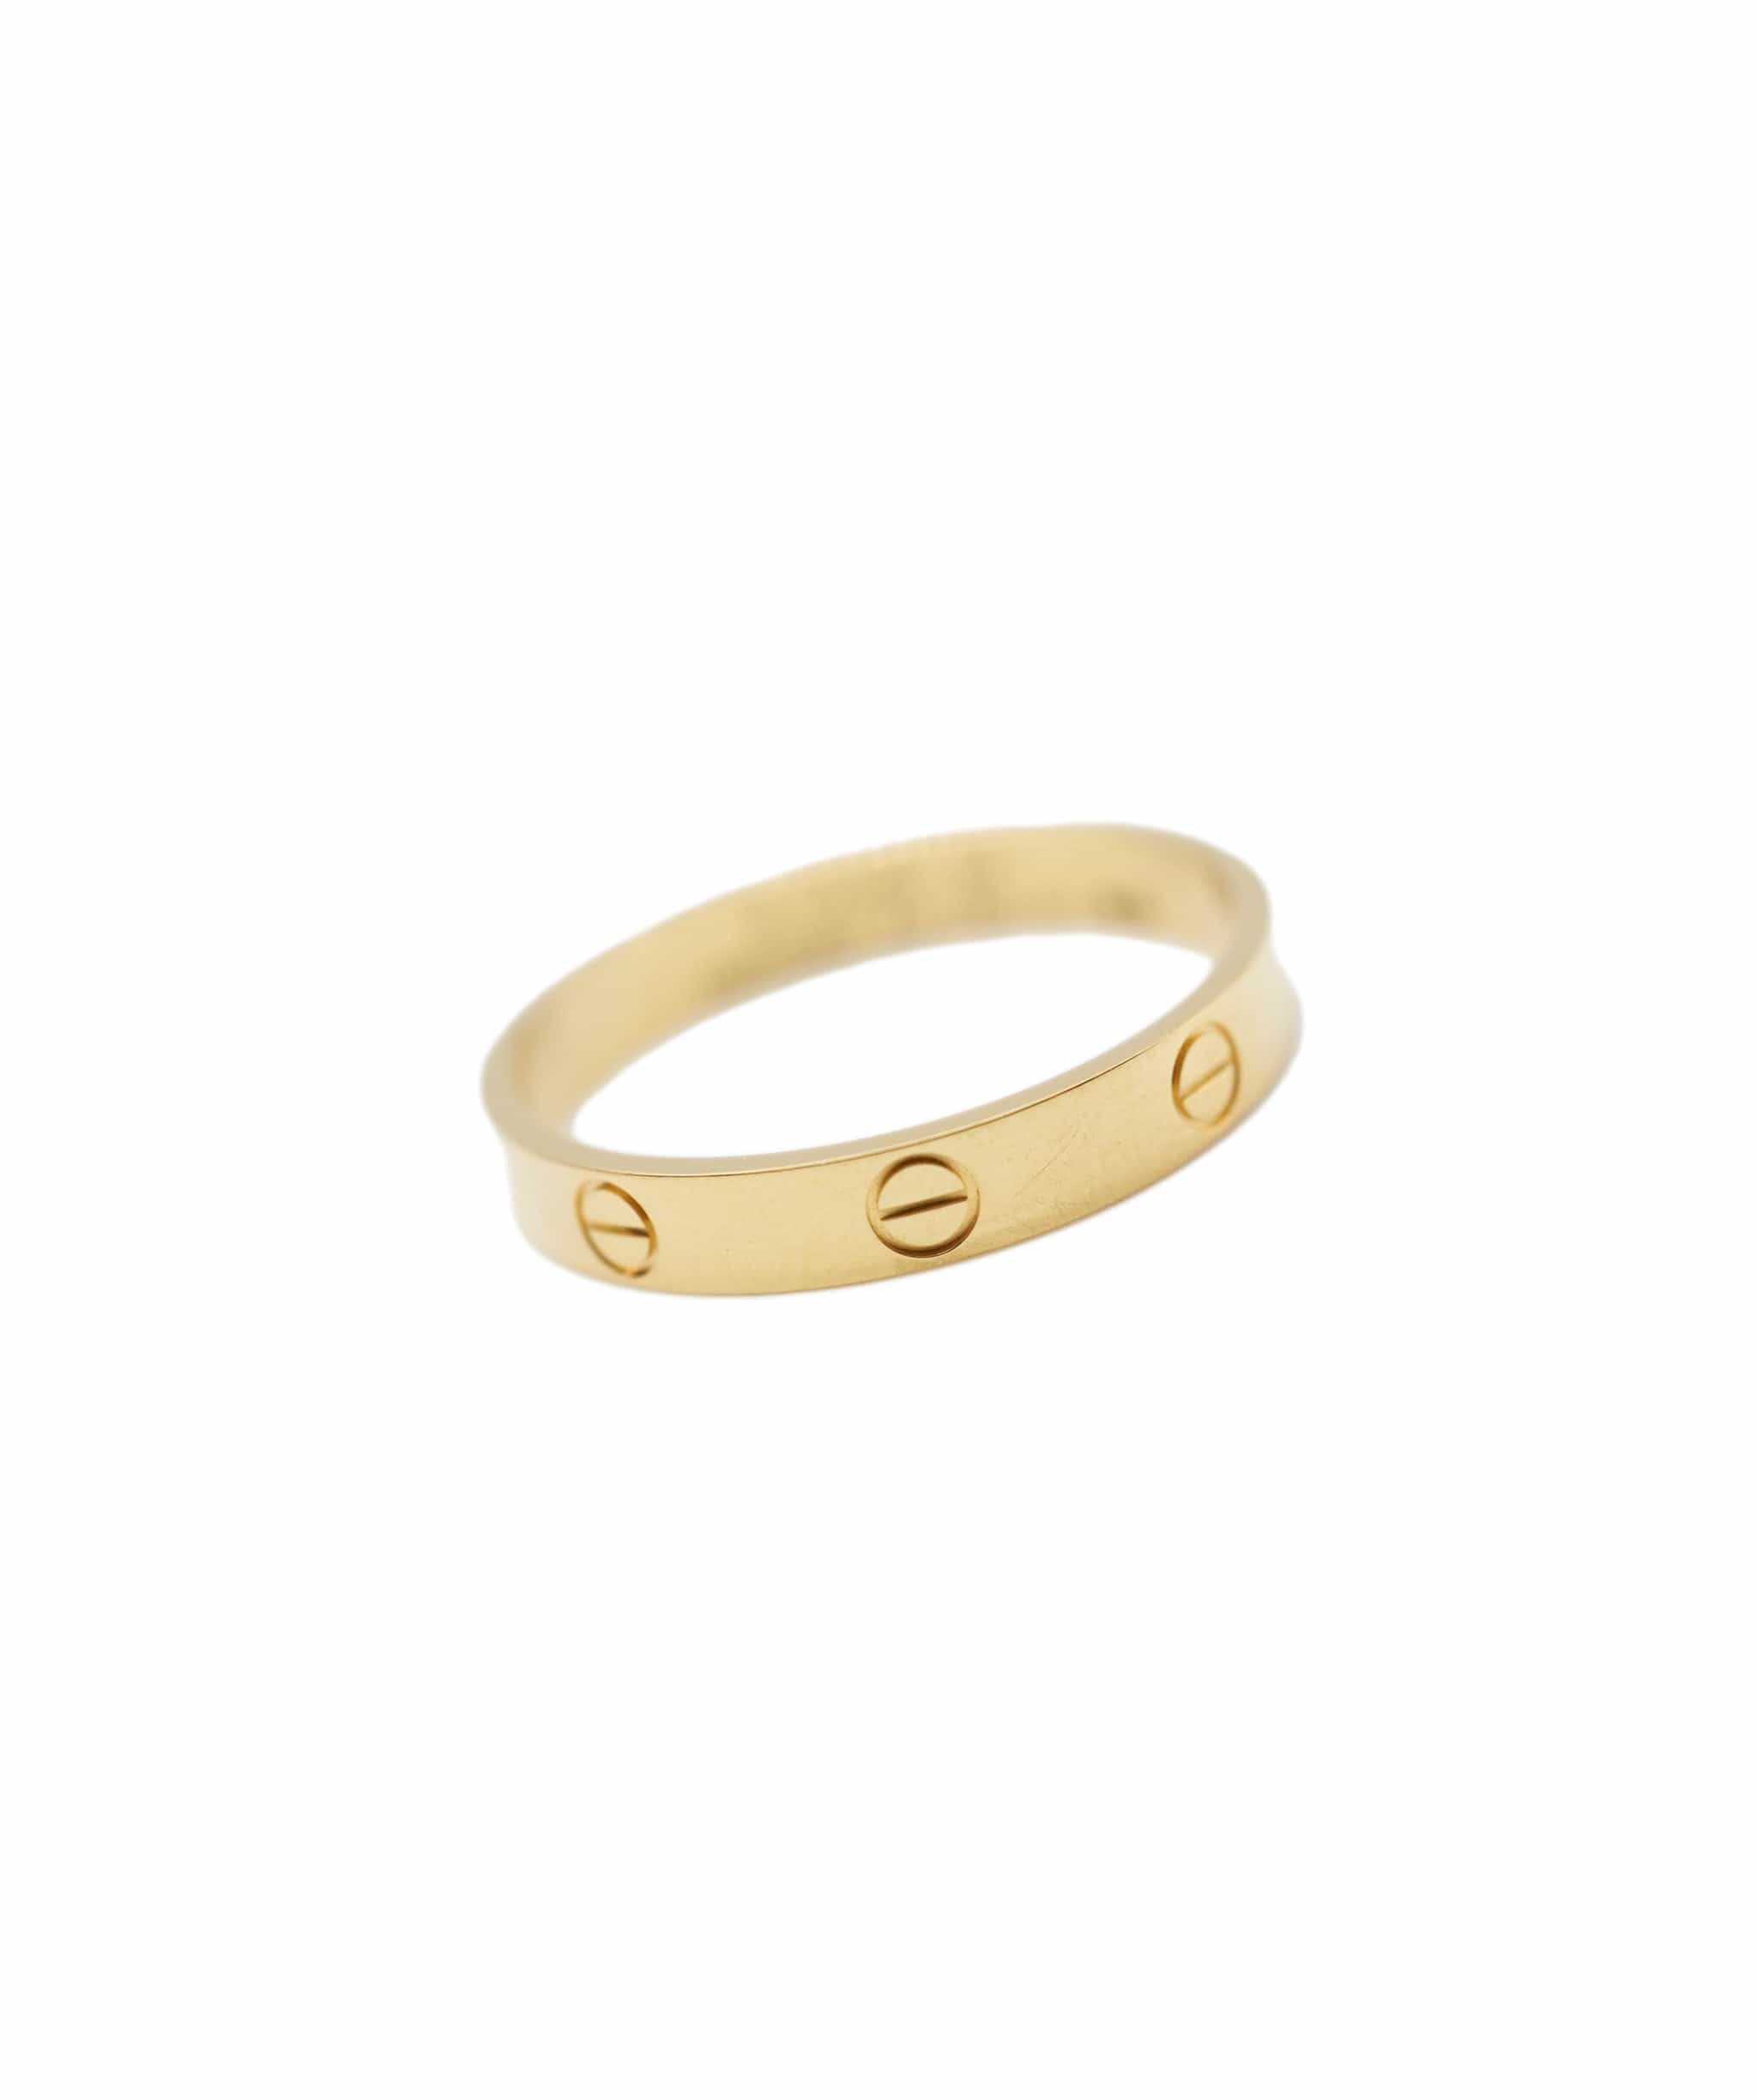 Cartier Cartier Thin Love Ring, Size 64 ABC0747